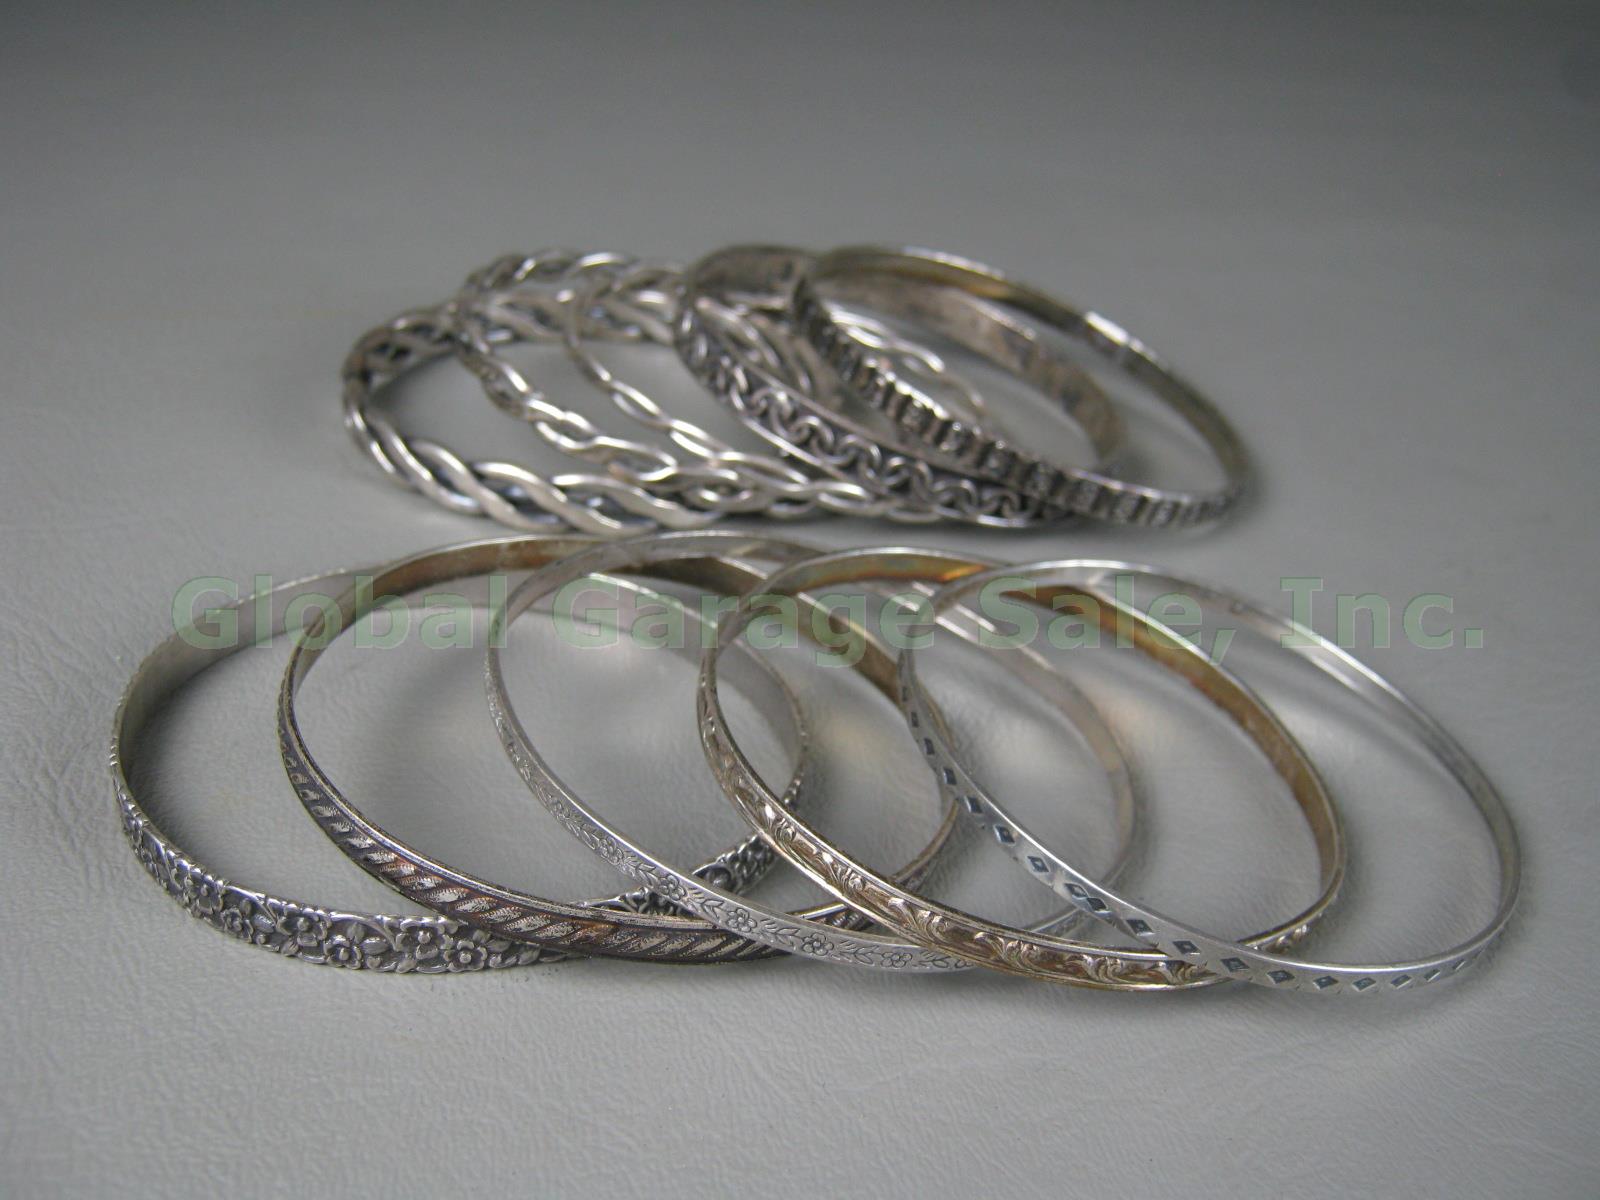 10 Vtg Sterling Silver Bangle Bracelets Lot 4.6 Ounces Braided Woven Rope Floral